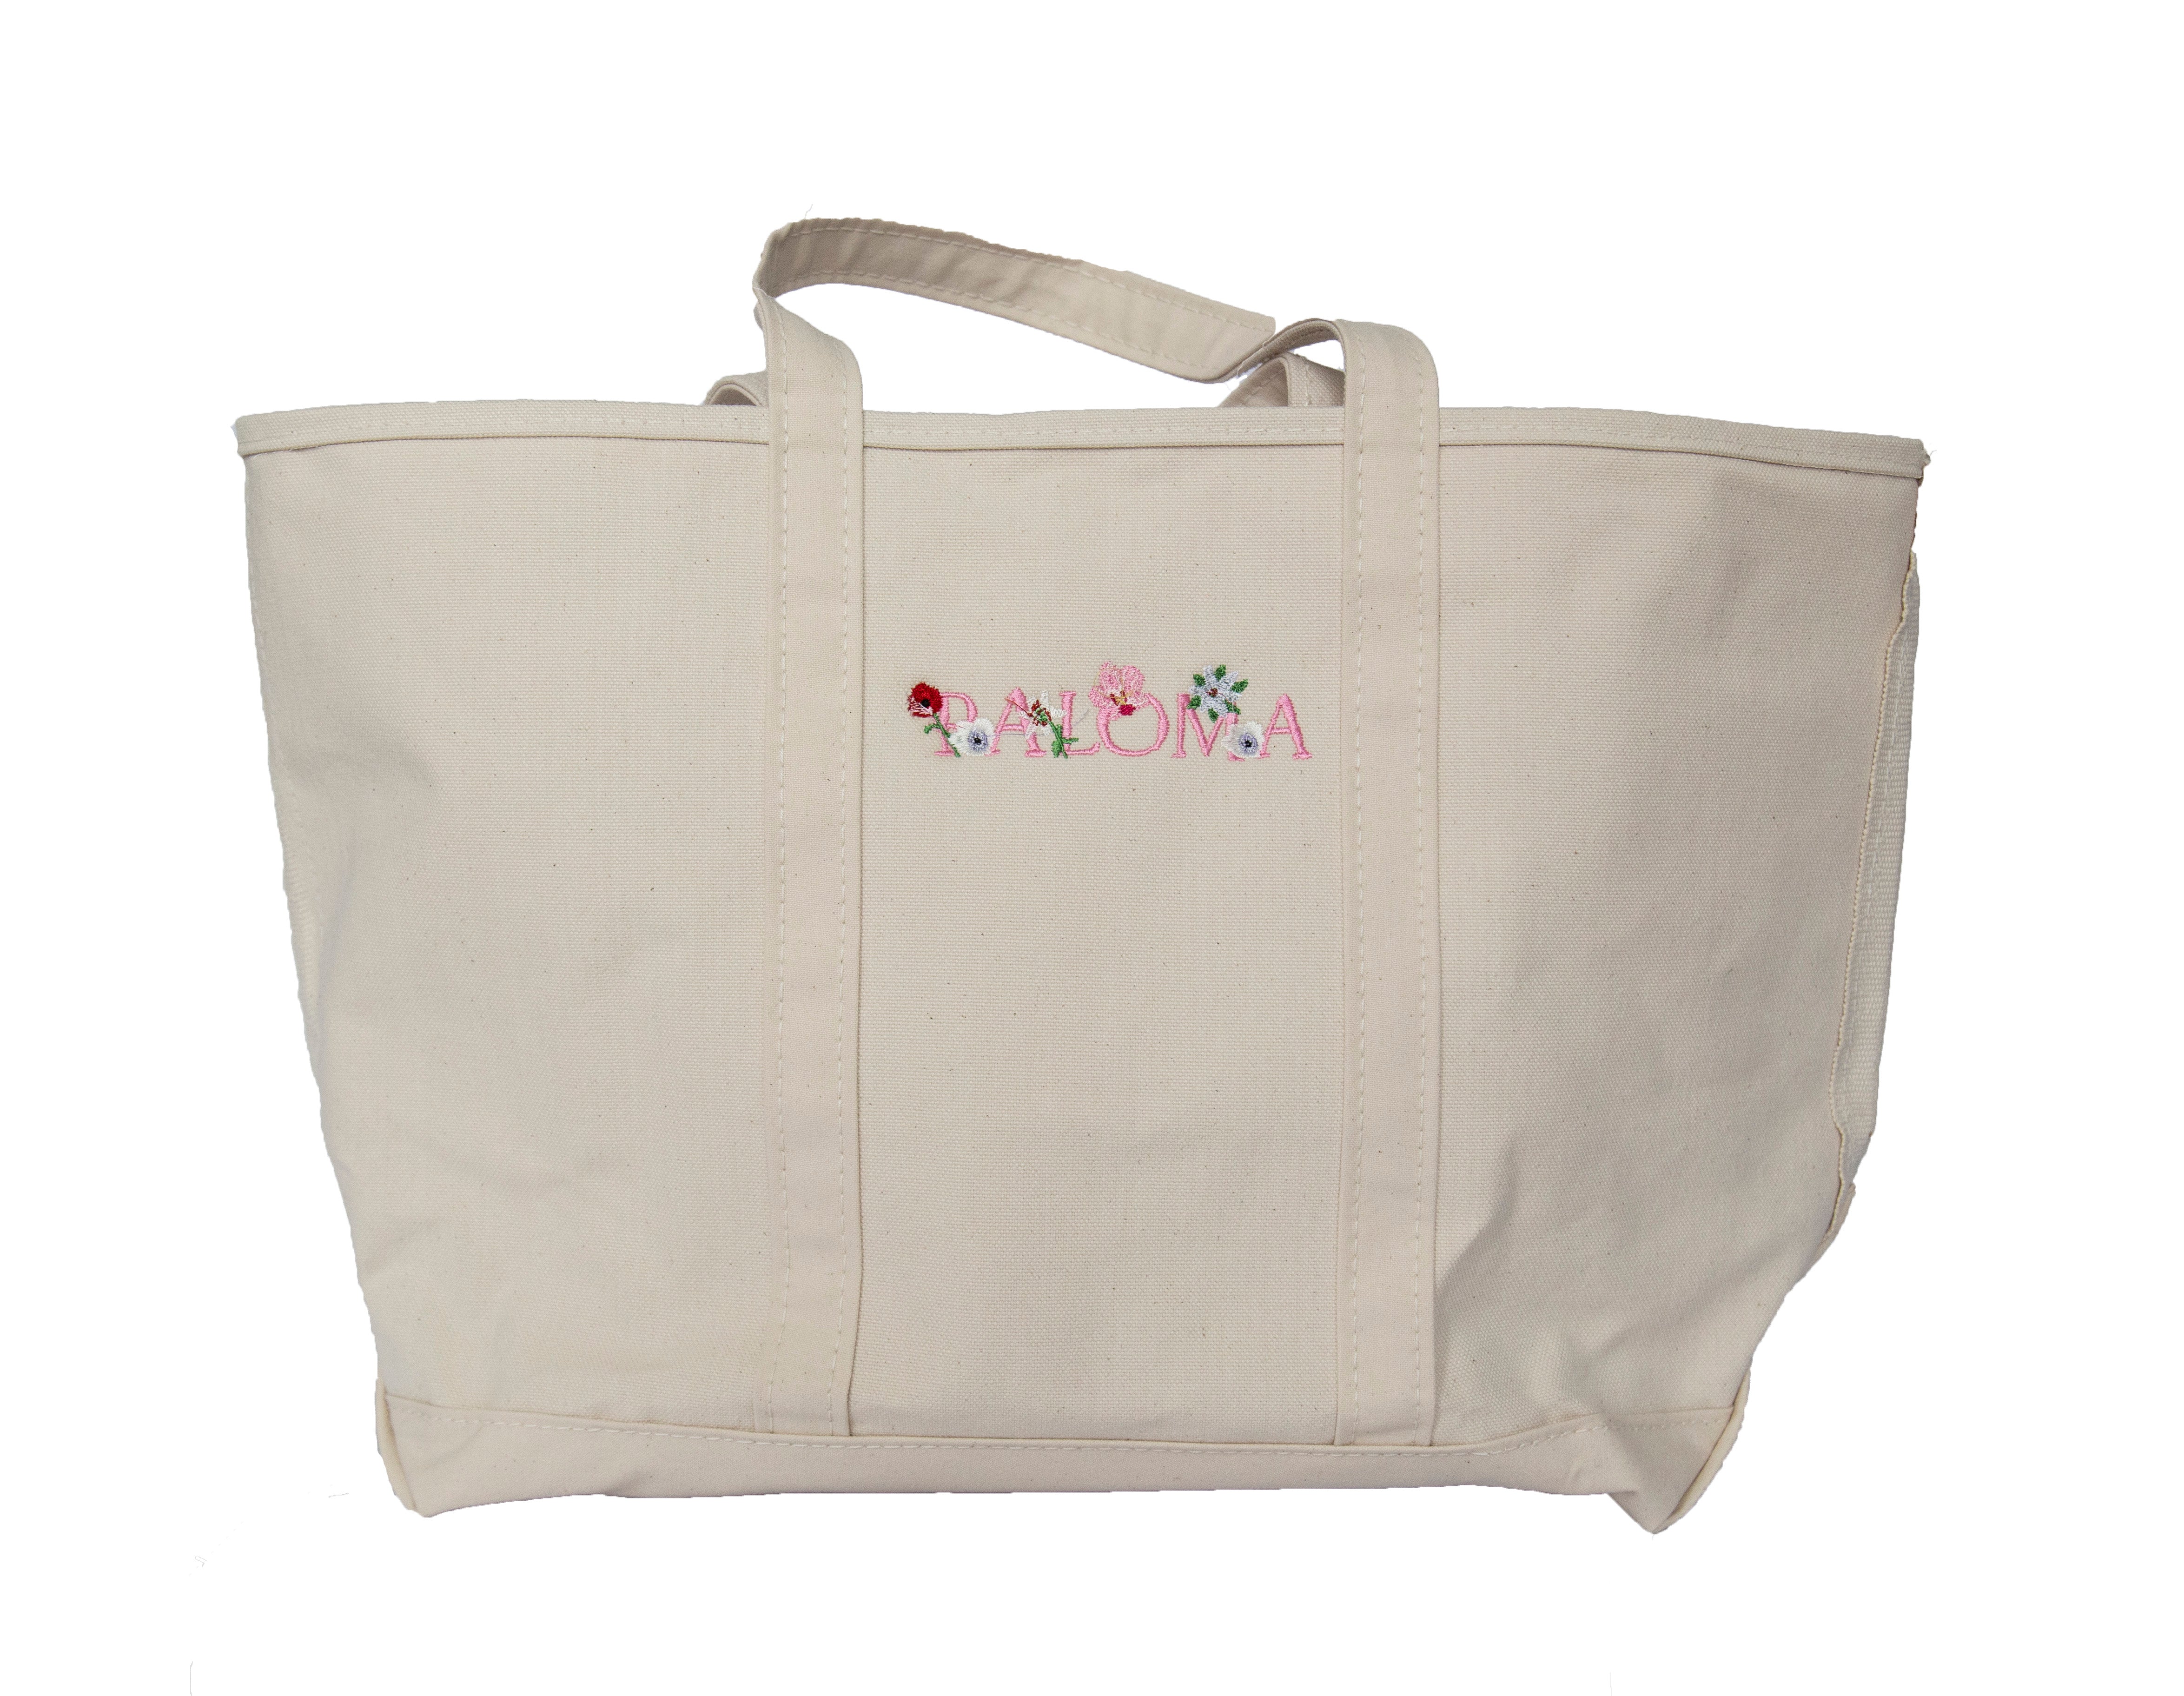 Customized, Embroidered Tote Bag